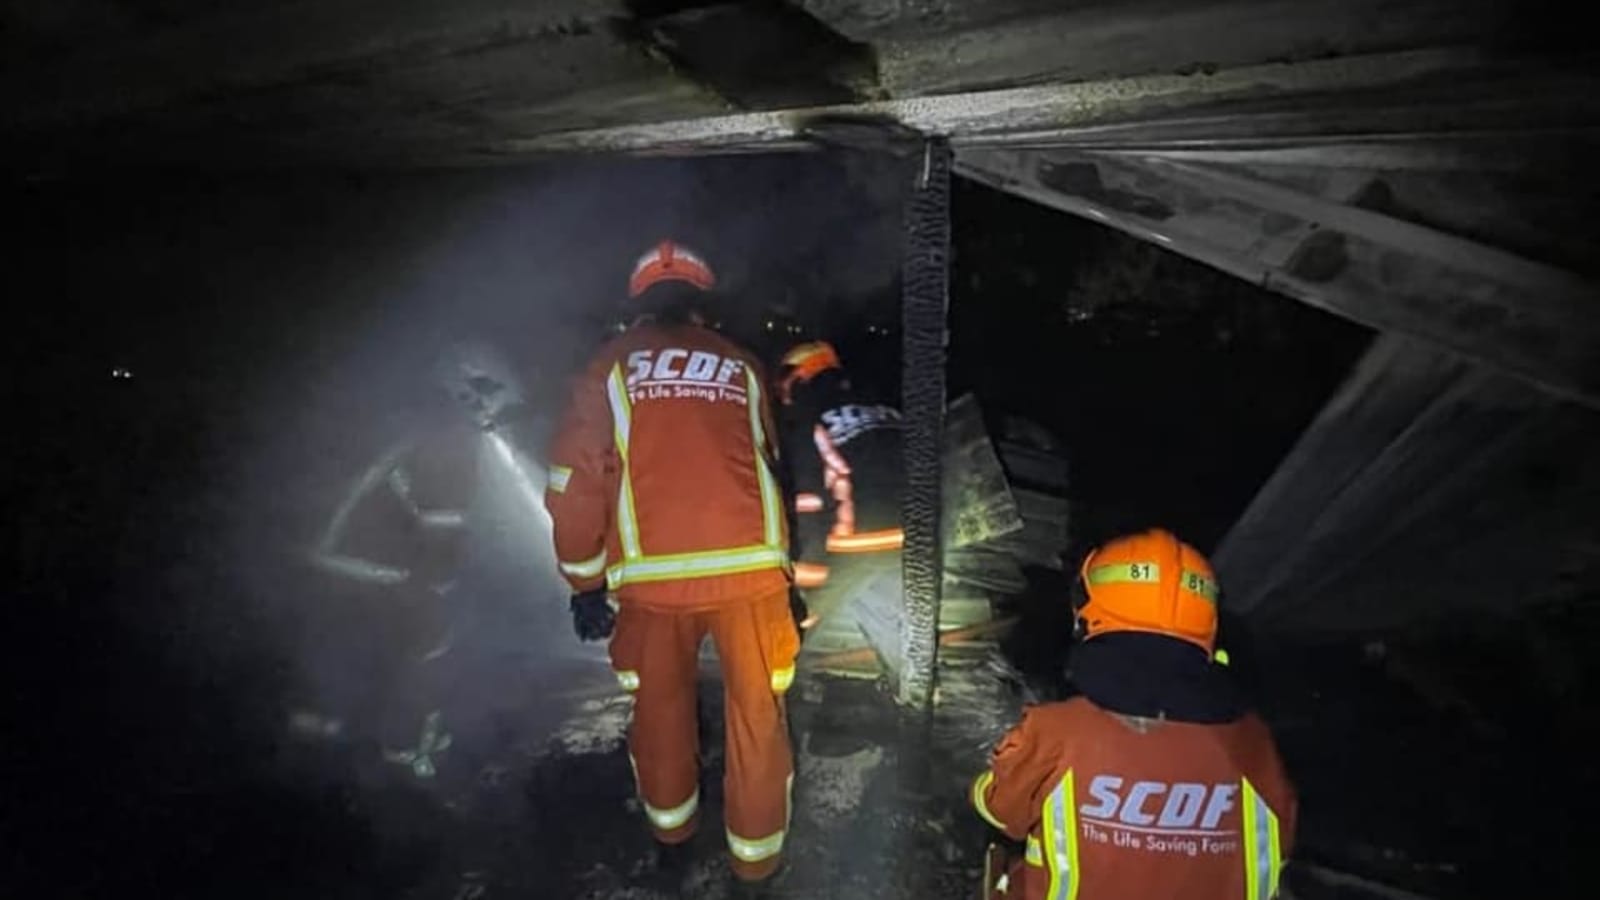 Kusu Island fire not deliberately started, says SCDF after preliminary investigation